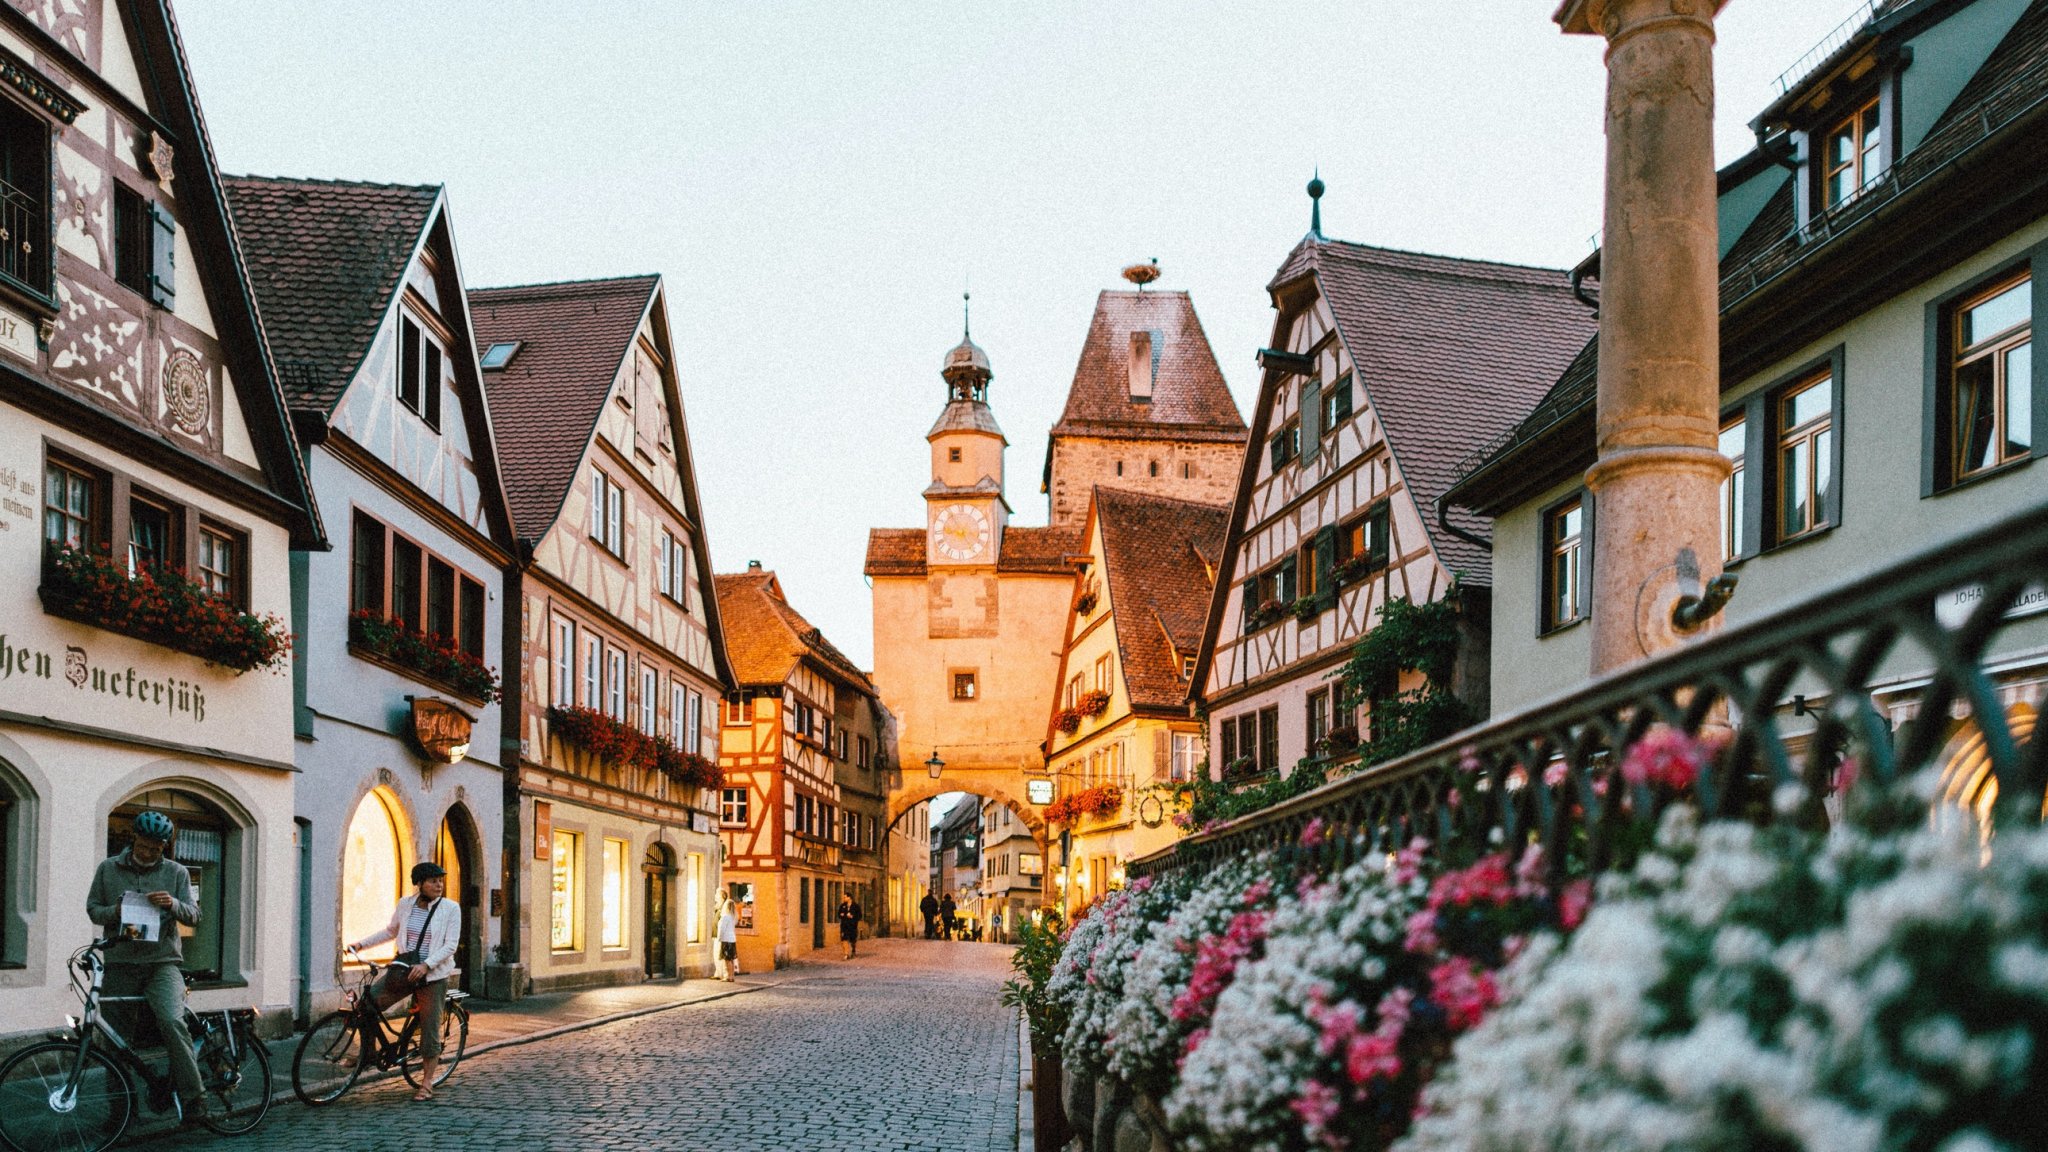 9 Charming Small Towns in Germany to Visit in 2022